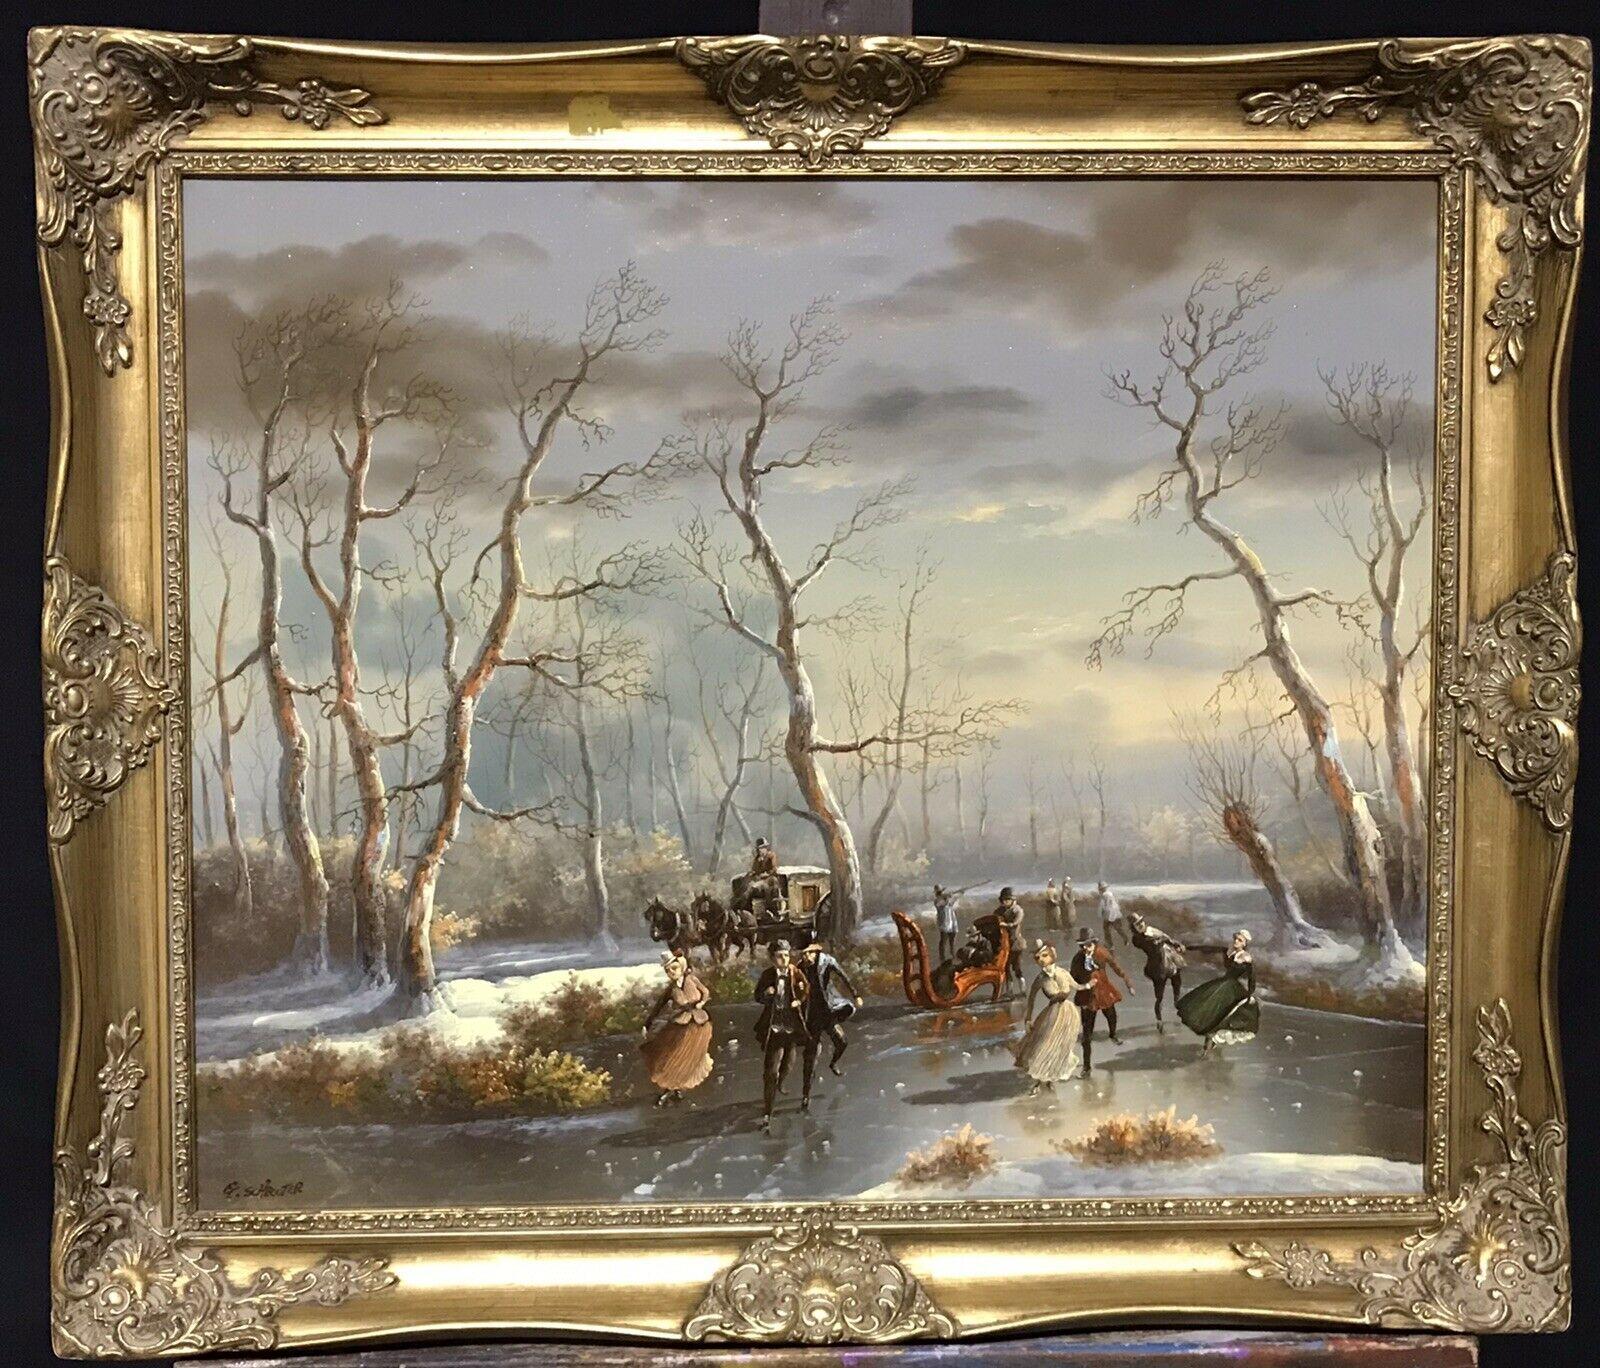 Vintage Fall Landscape Oil Painting of a Rustic Cottage Scene in Wooden Frame Signed by Artist